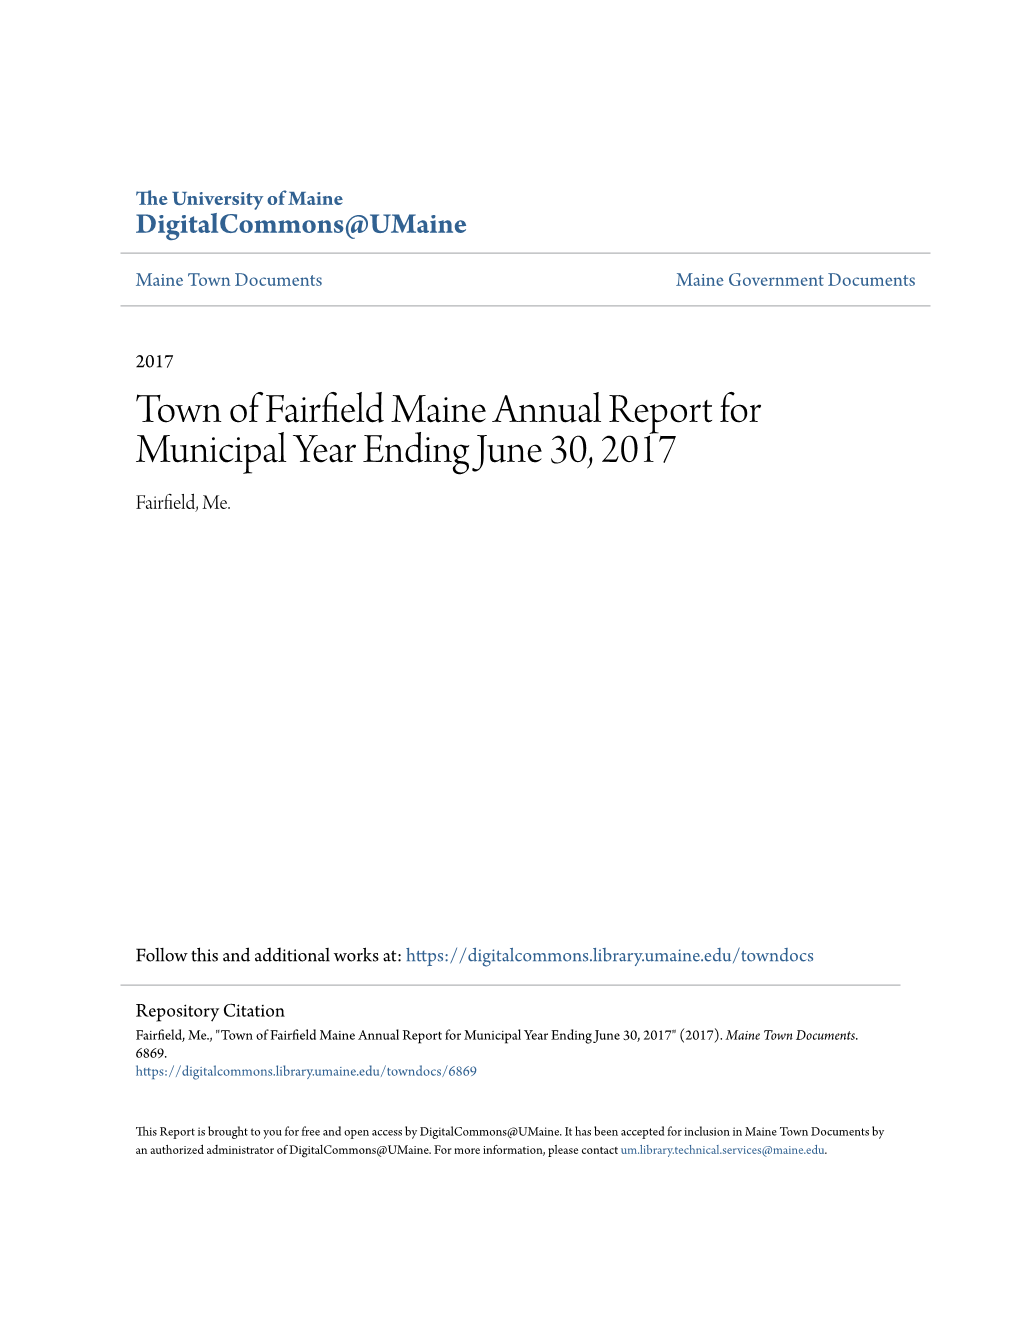 Town of Fairfield Maine Annual Report for Municipal Year Ending June 30, 2017" (2017)